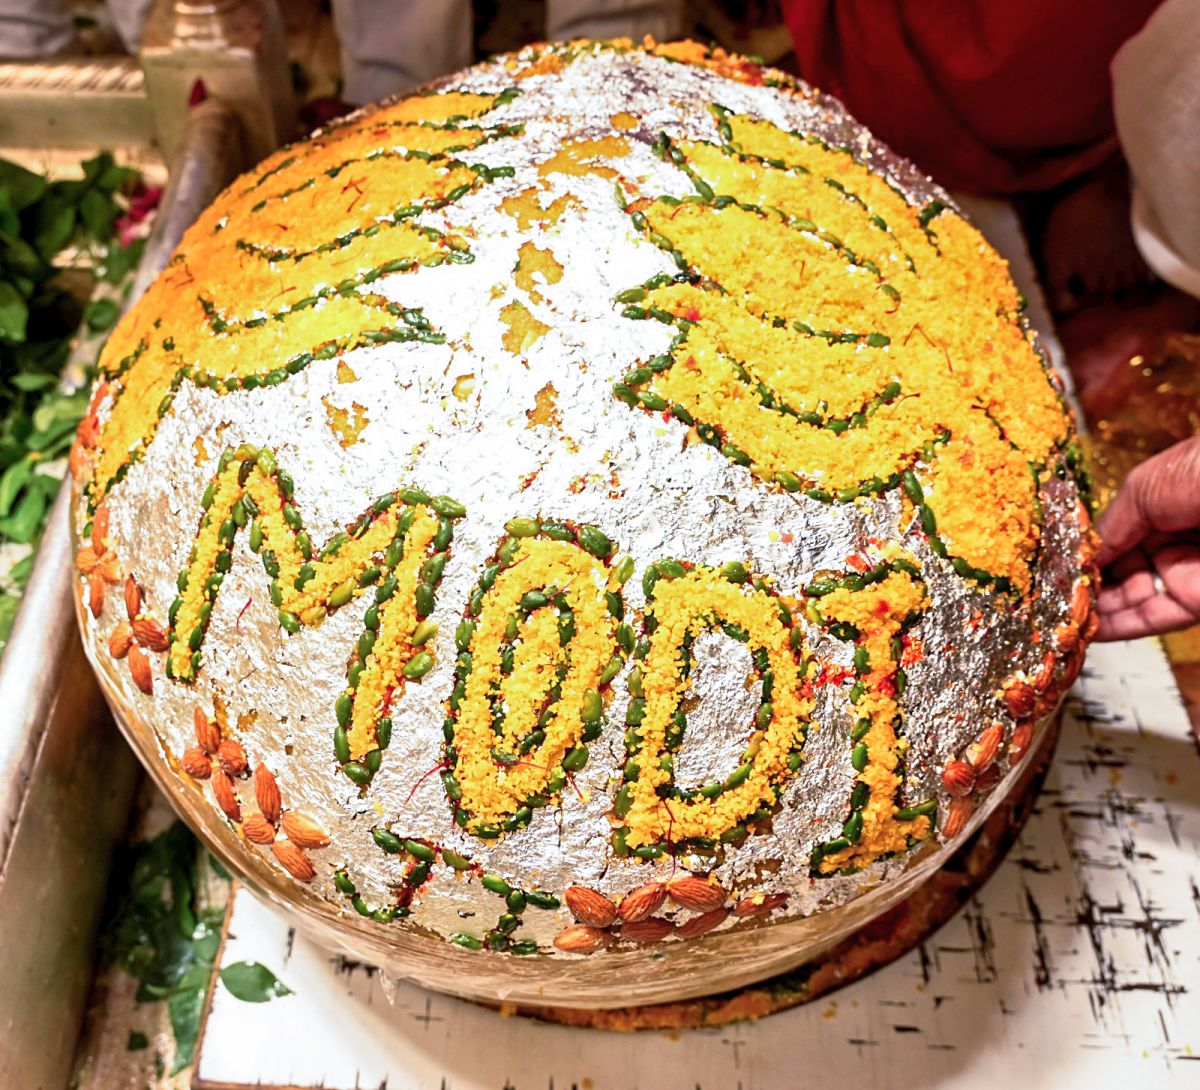 This year's icing on Christmas cake in Kolkata: symbols of political parties